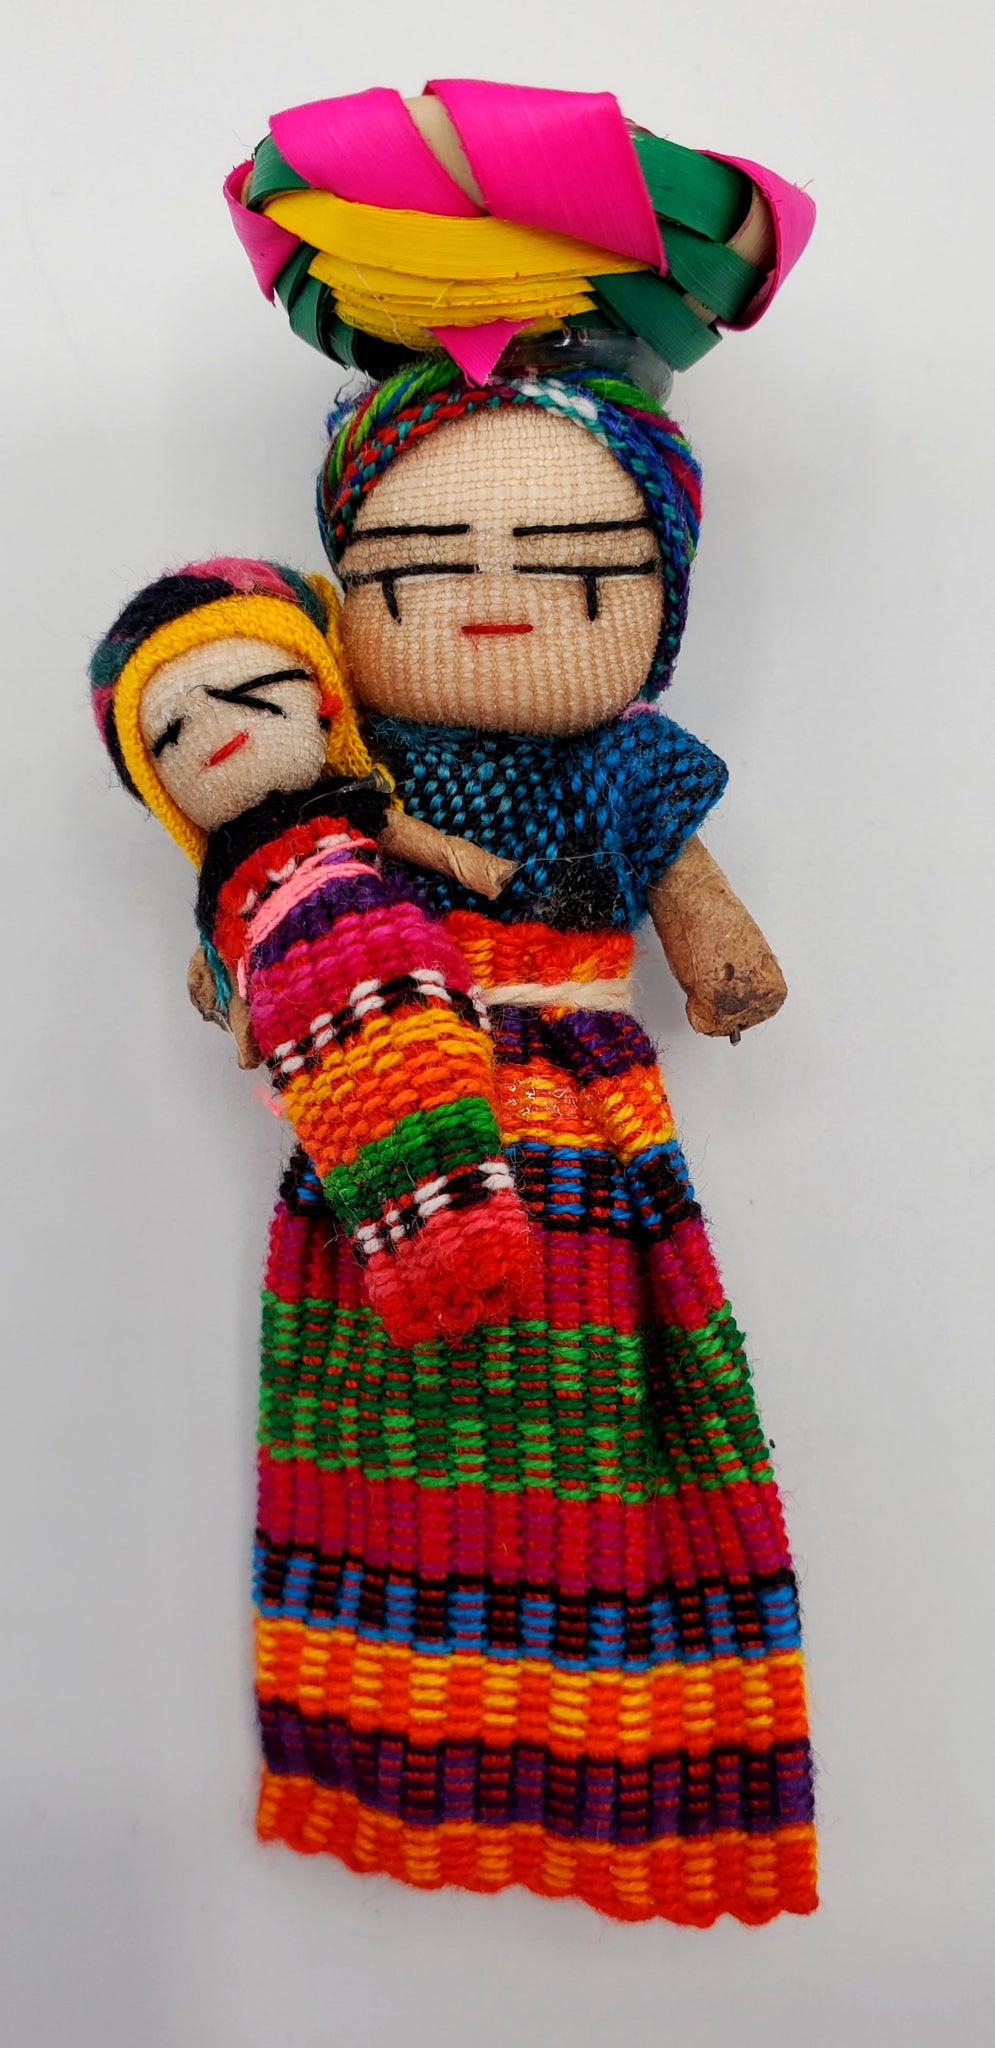 Rediscovering the 90s Obsession: Worry Dolls from Guatemala